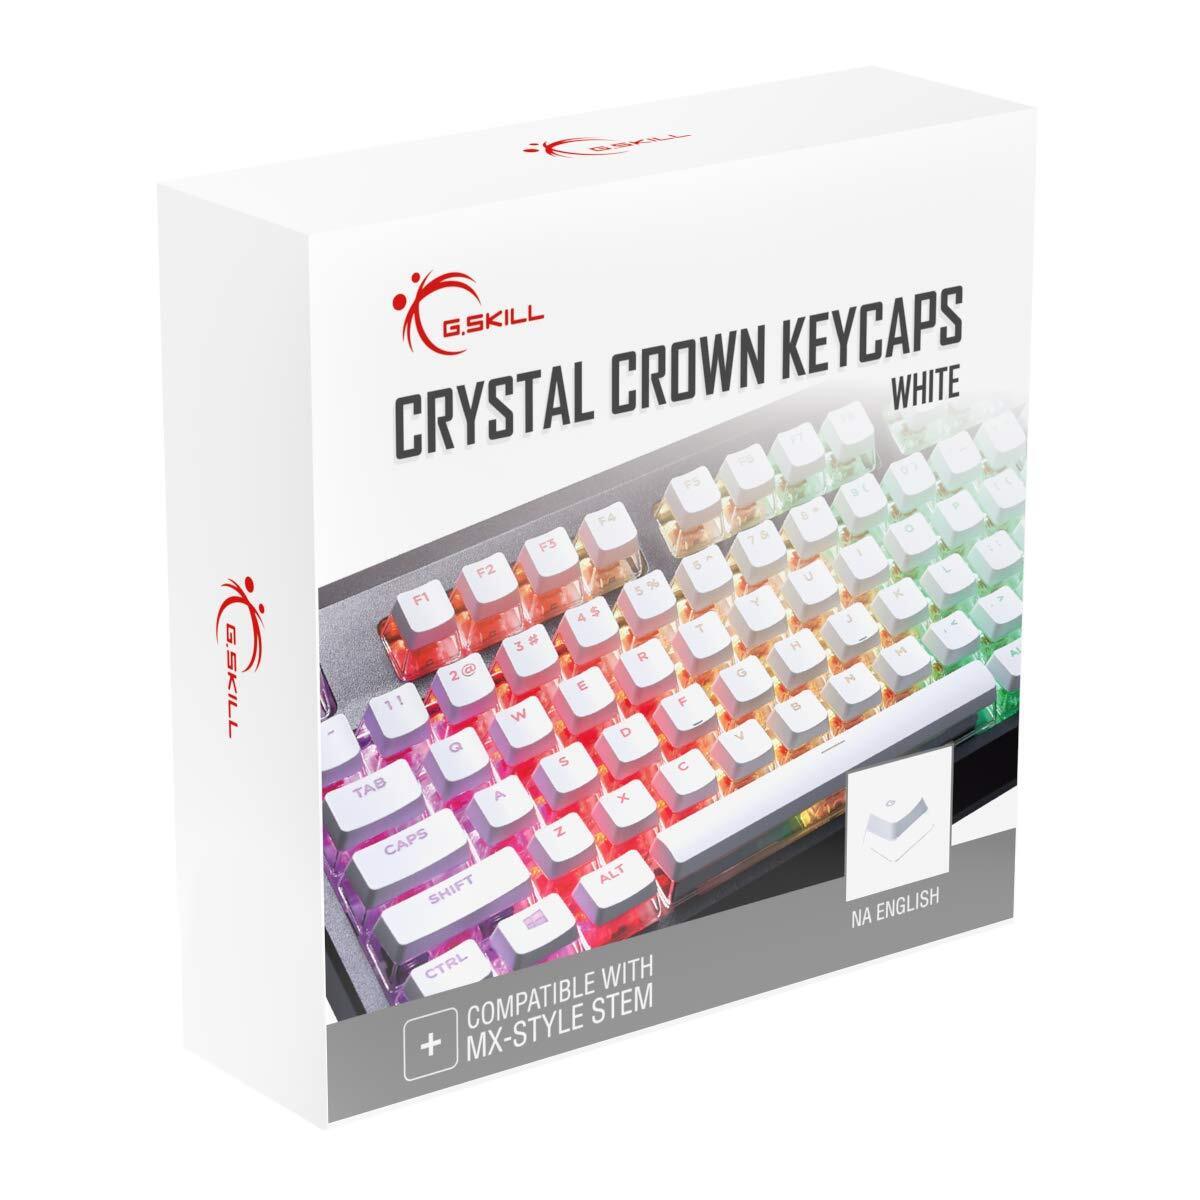 G.SKILL Crystal Crown Keycaps - Keycap Set with Transparent Layer for Mechani...